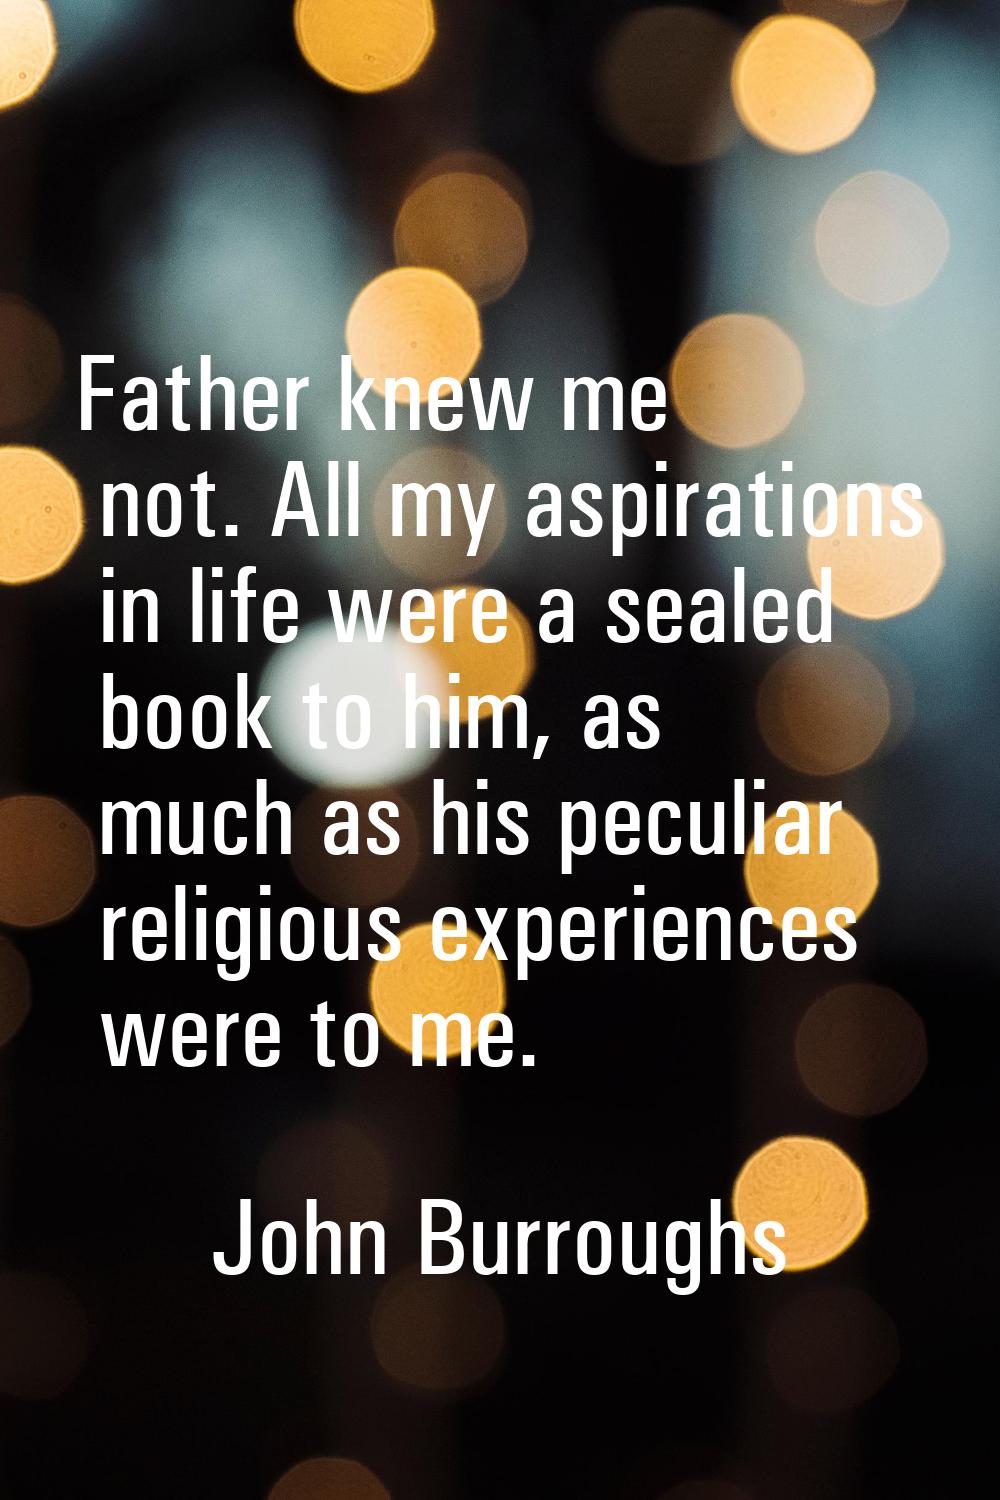 Father knew me not. All my aspirations in life were a sealed book to him, as much as his peculiar r